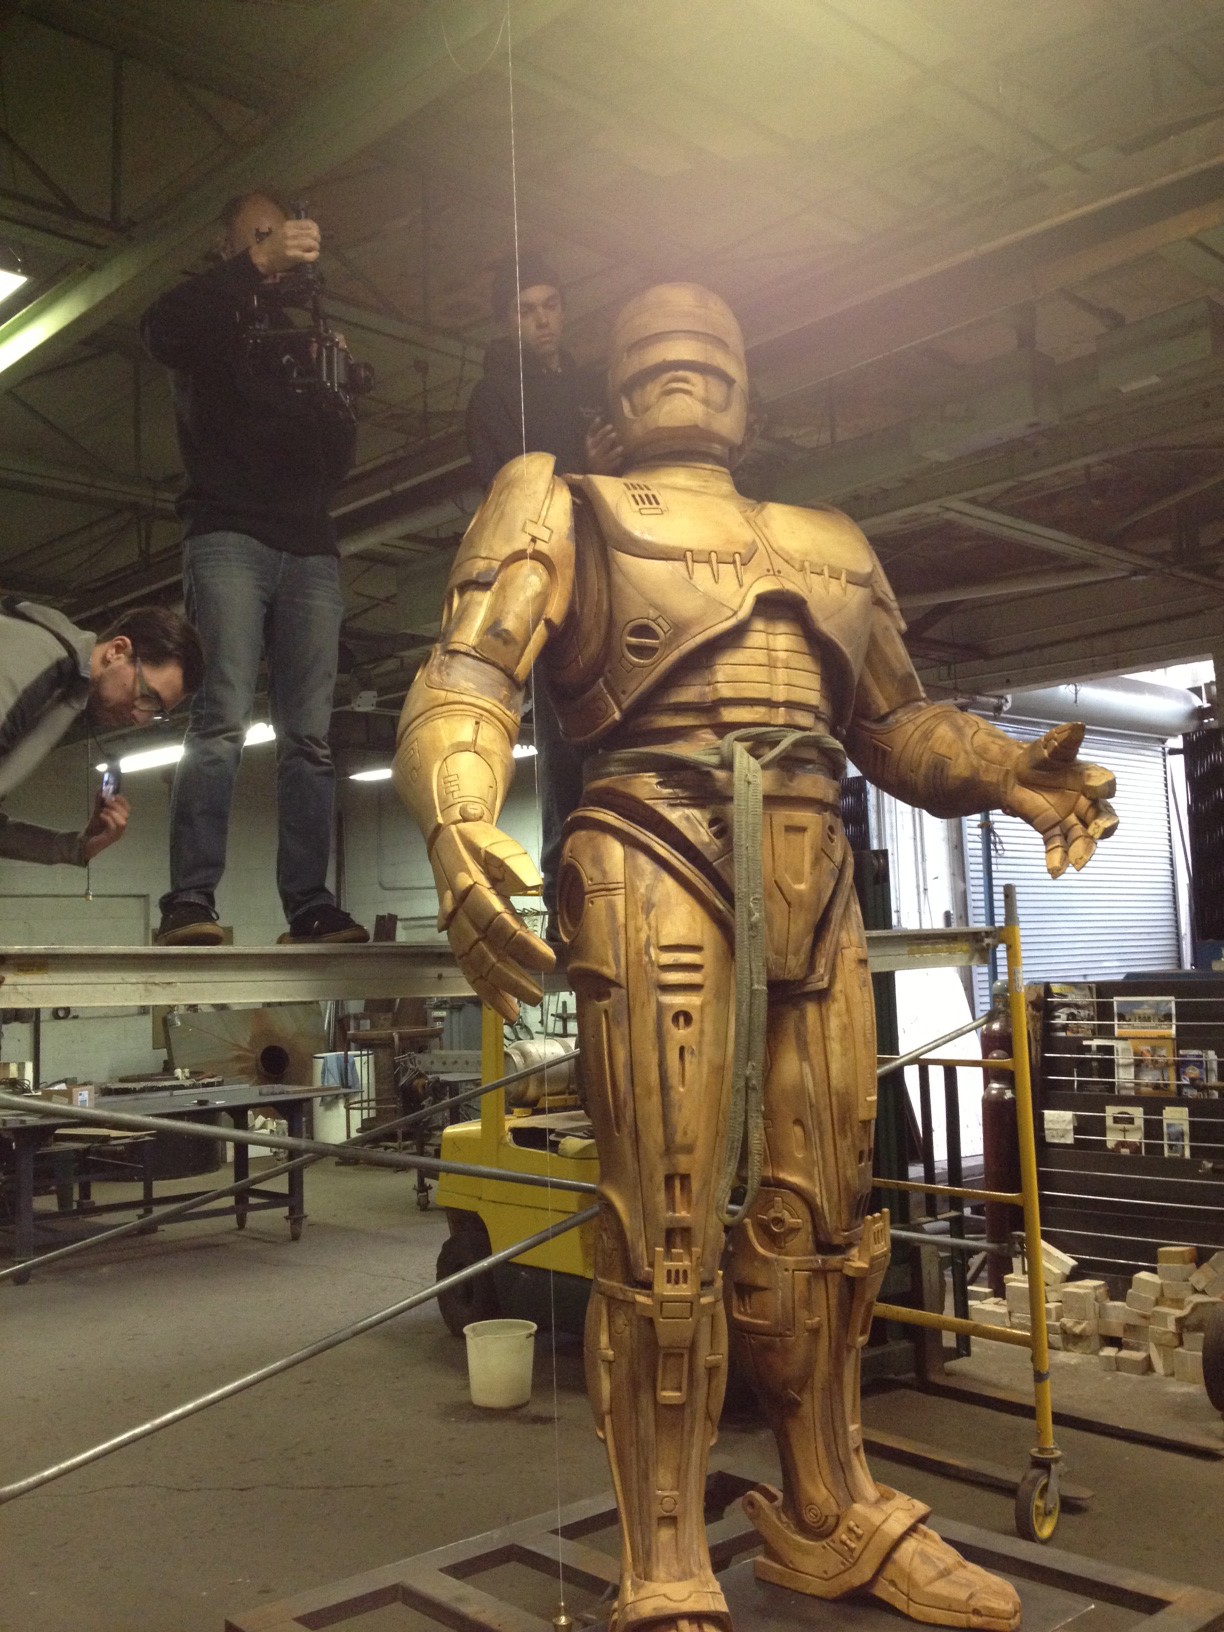 Take a Look at Detroit's RoboCop Statue